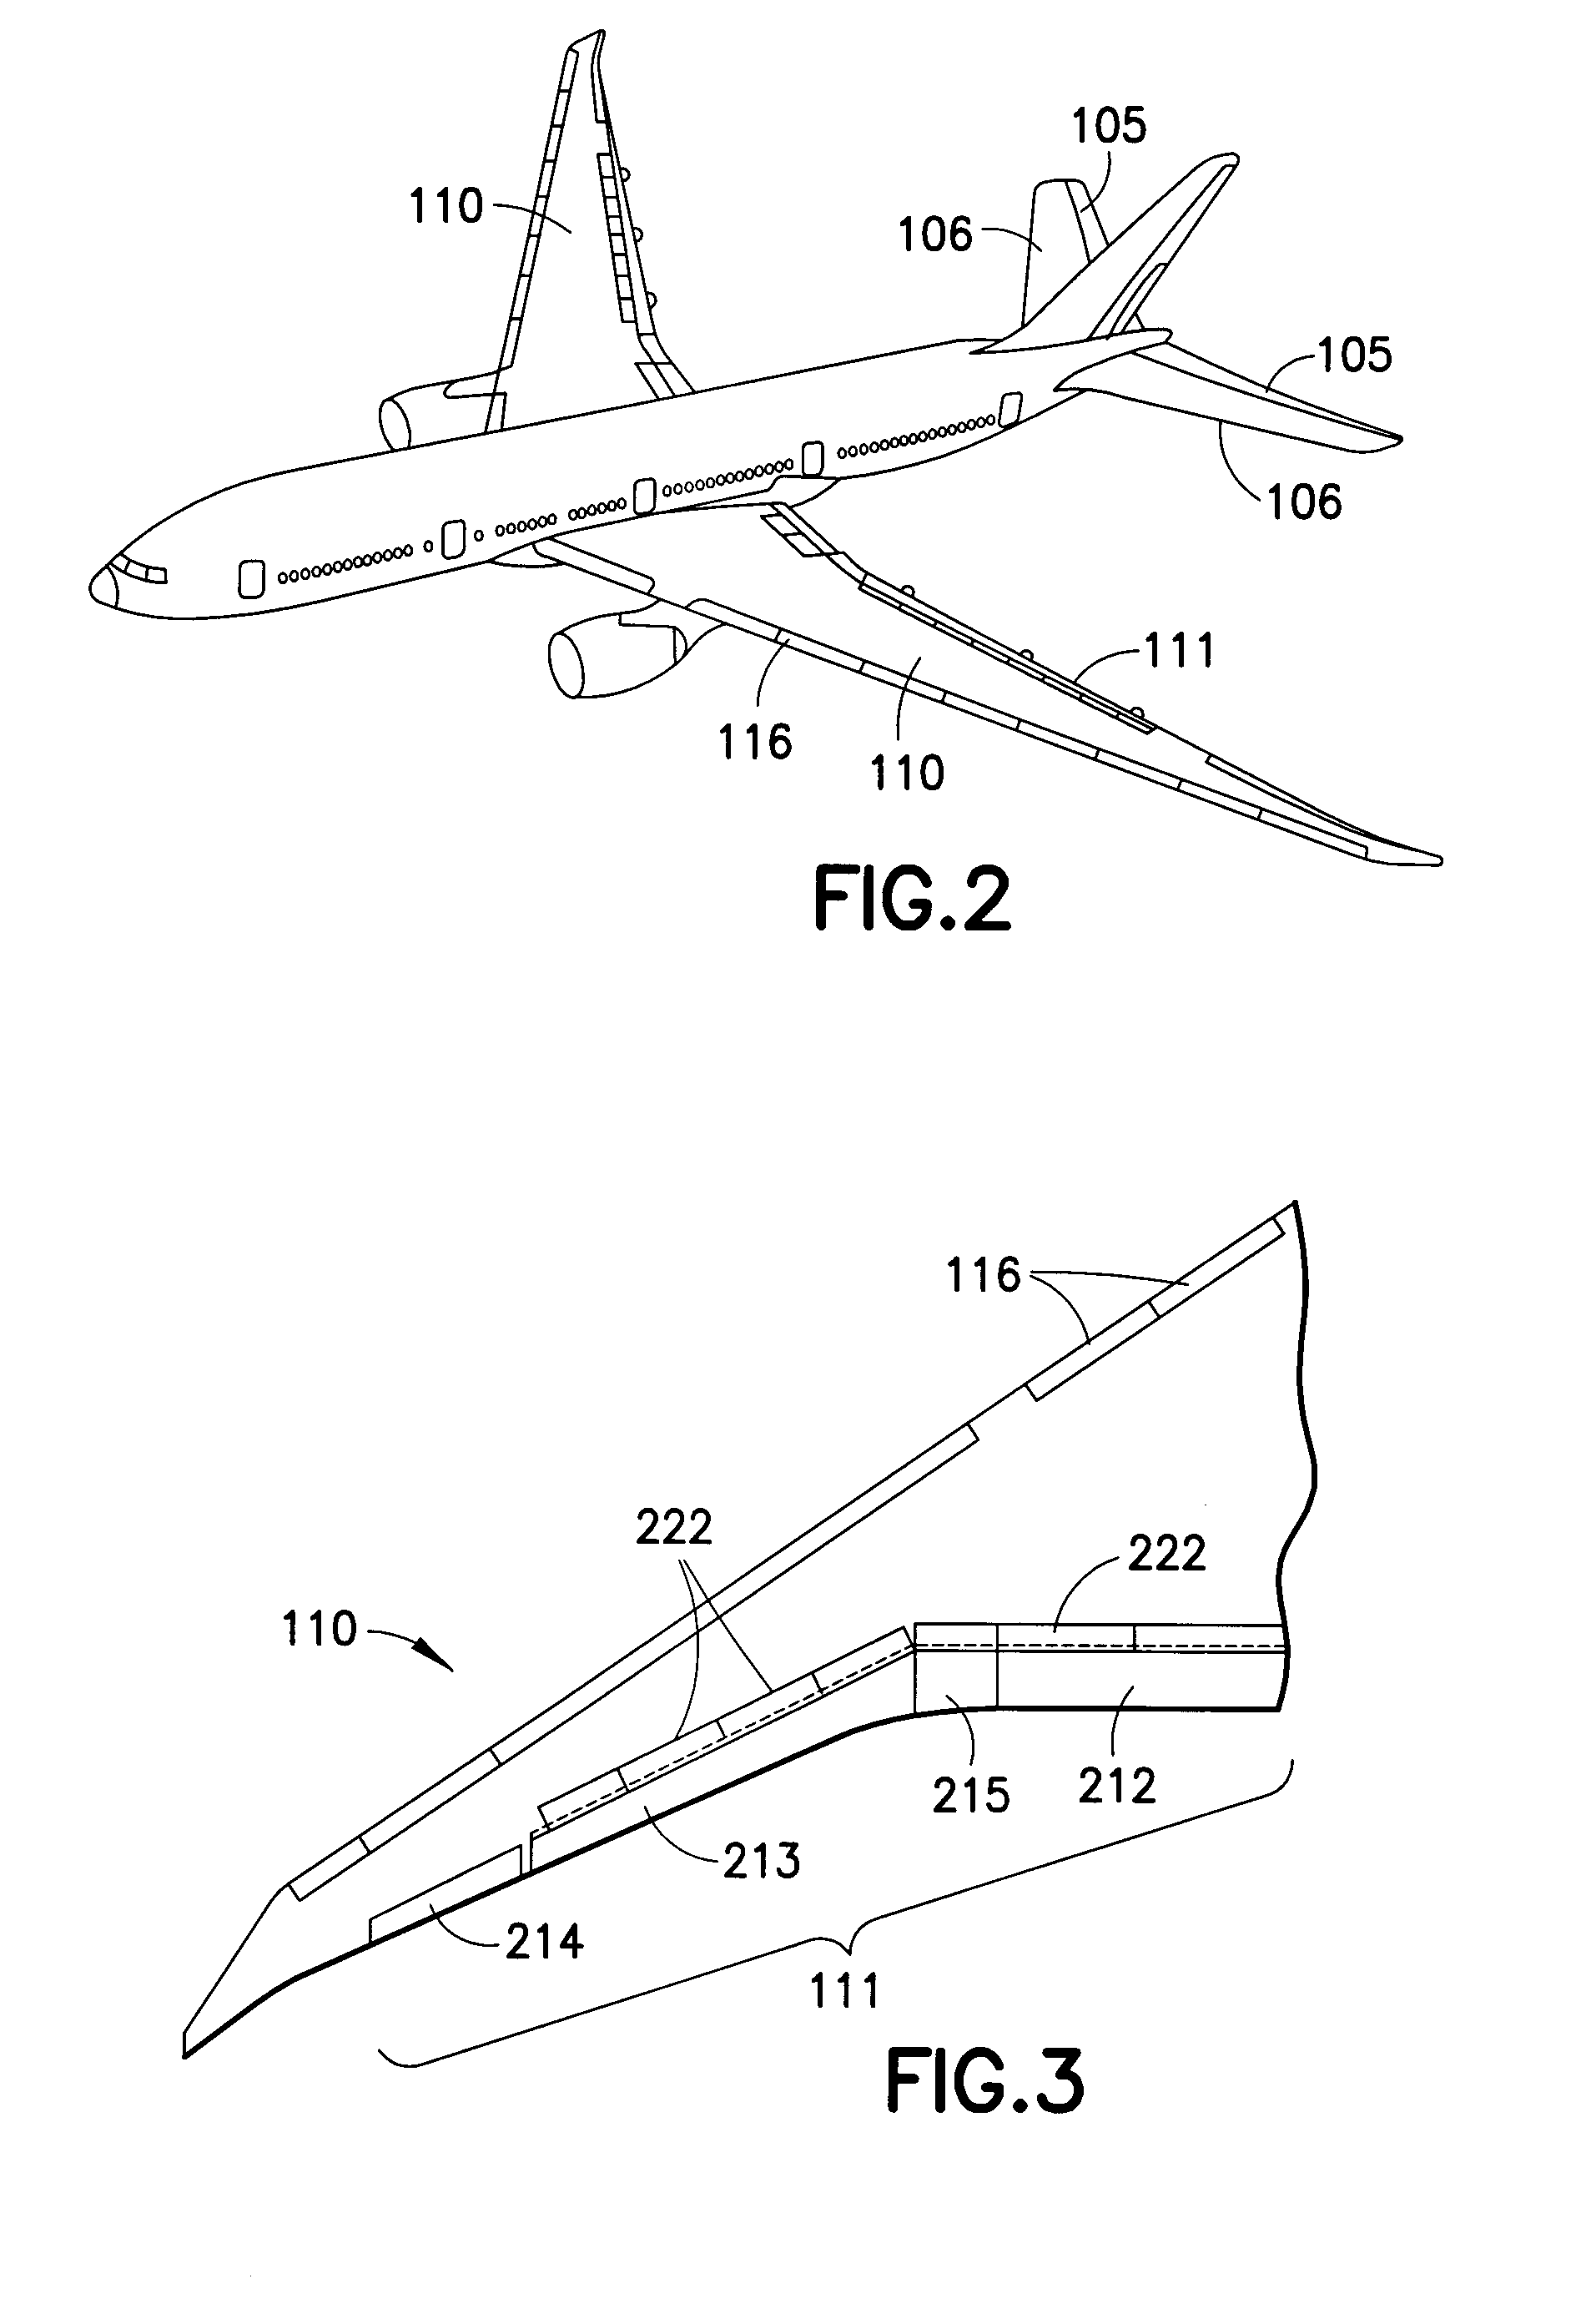 Dynamic Adjustment of Wing Surfaces for Variable Camber